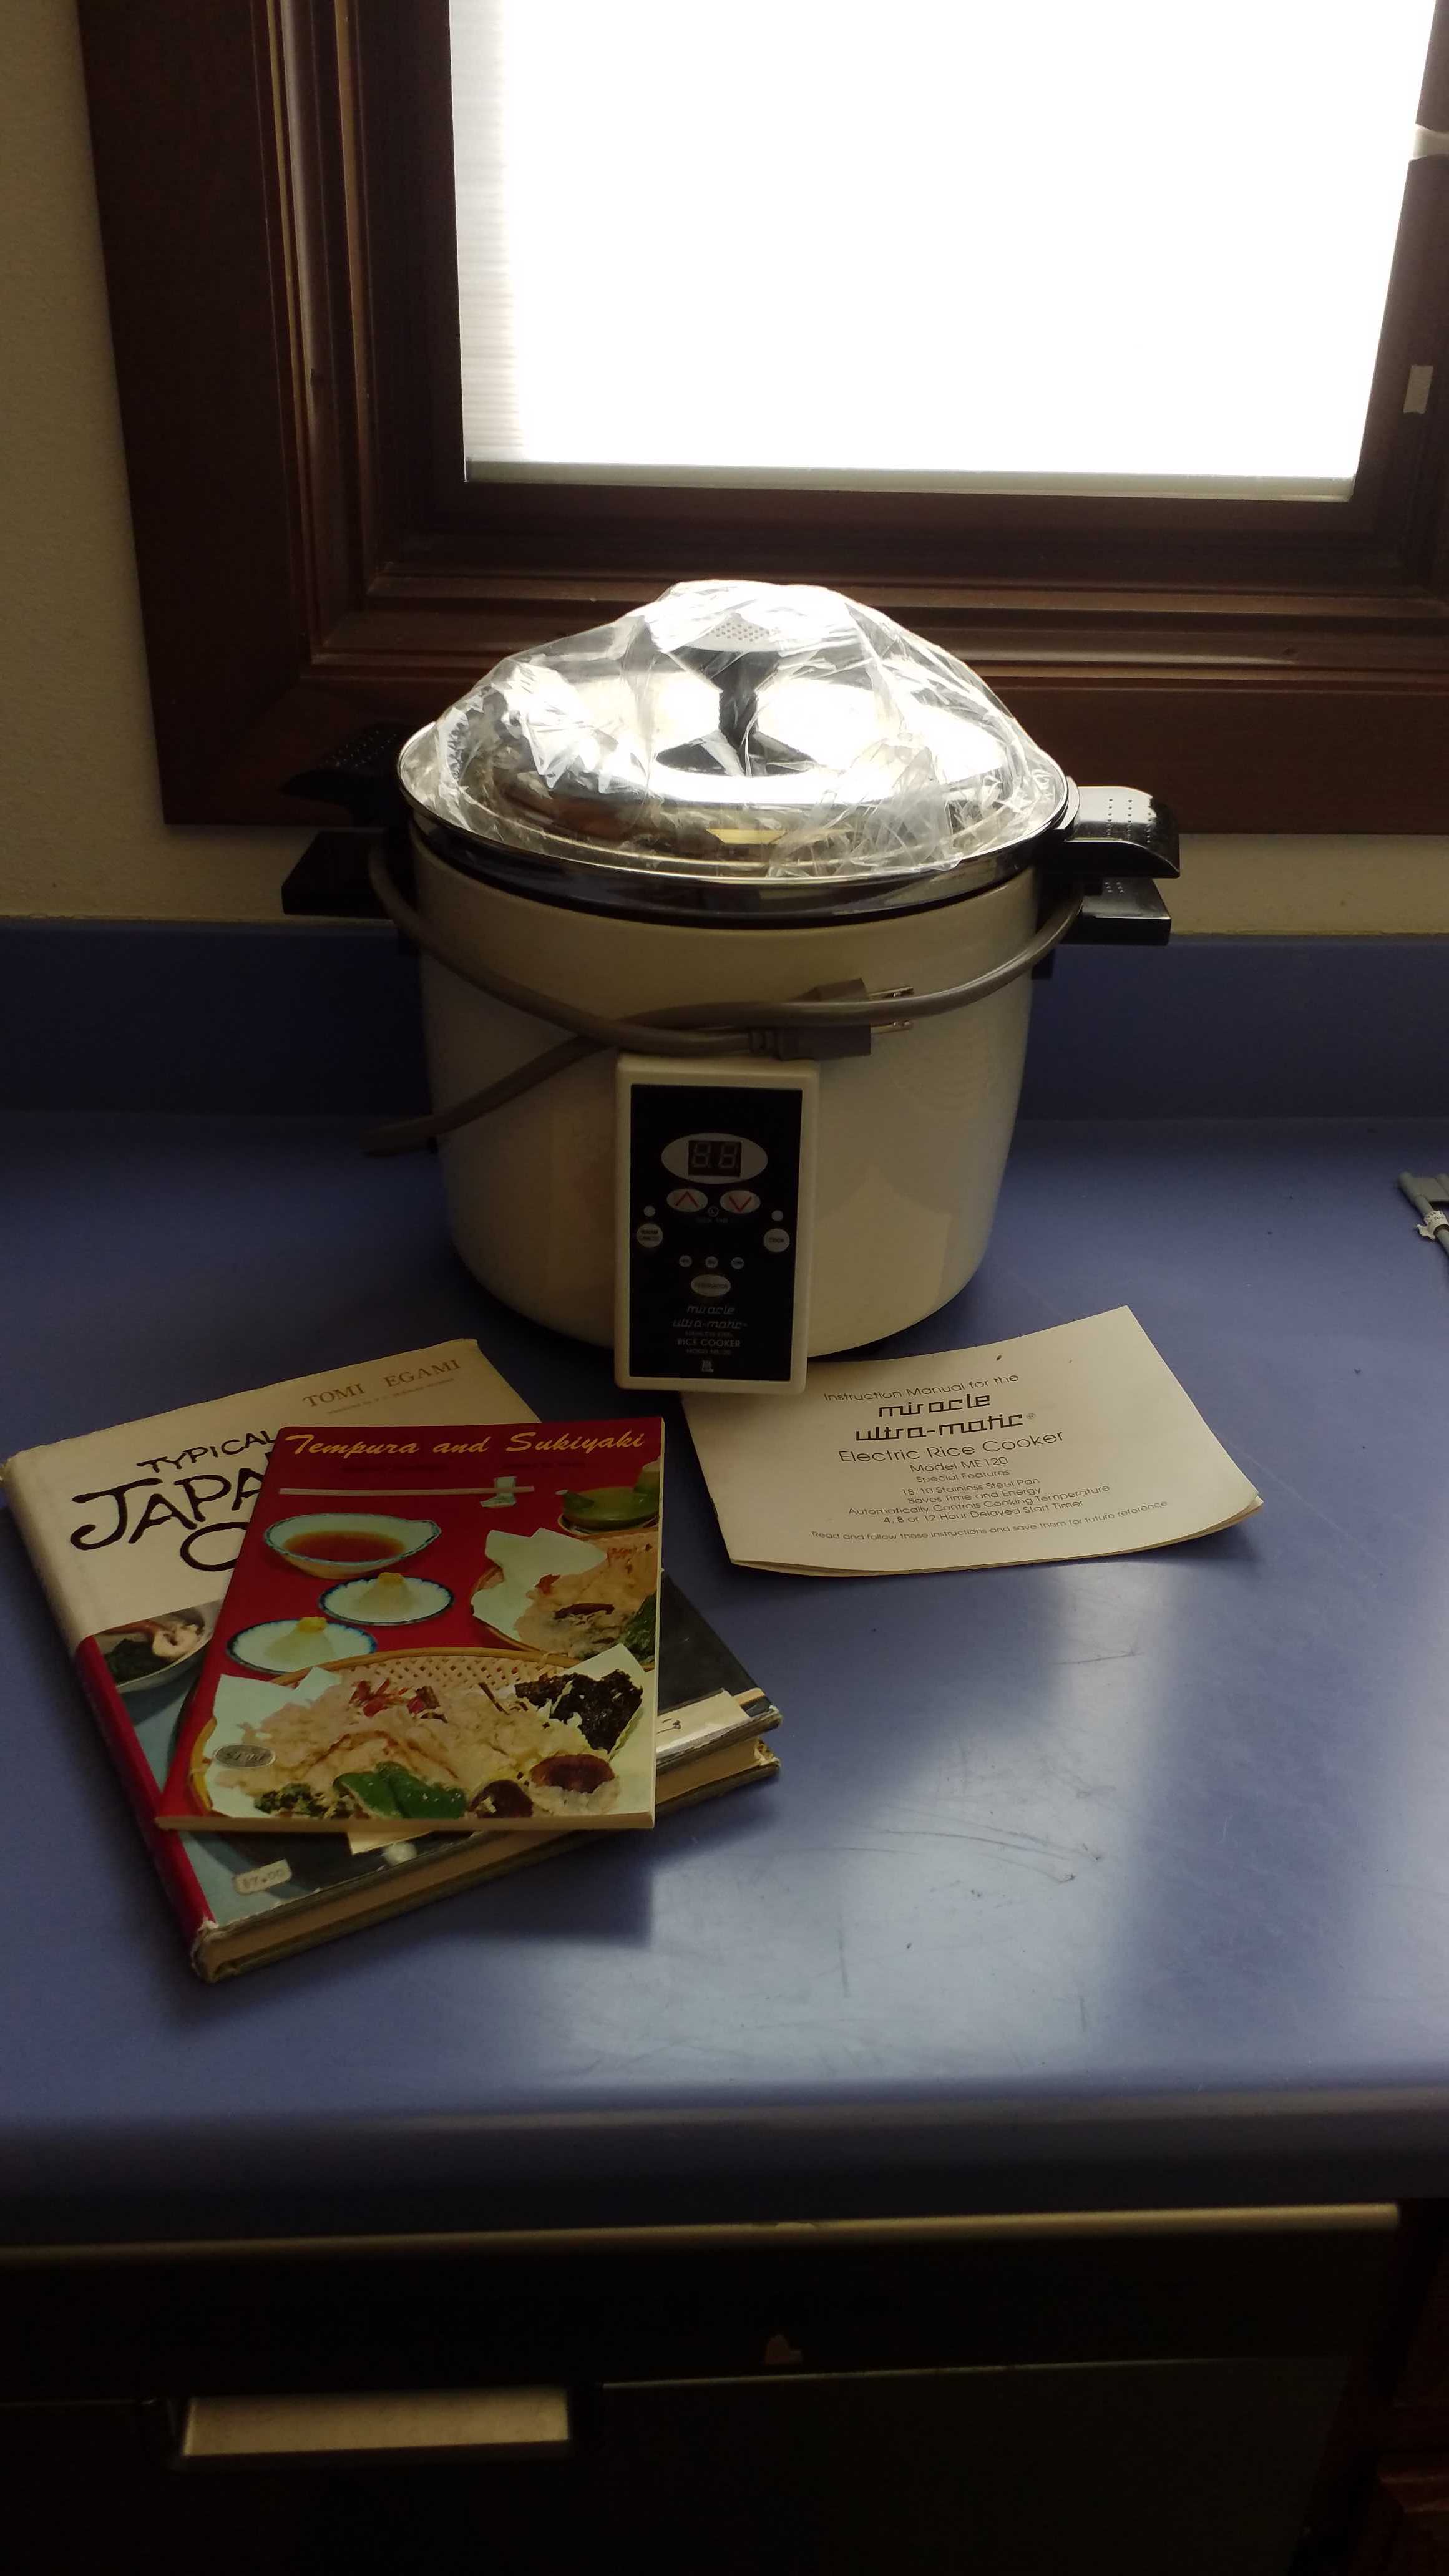 Rice Cookers for sale in Charleston, South Carolina